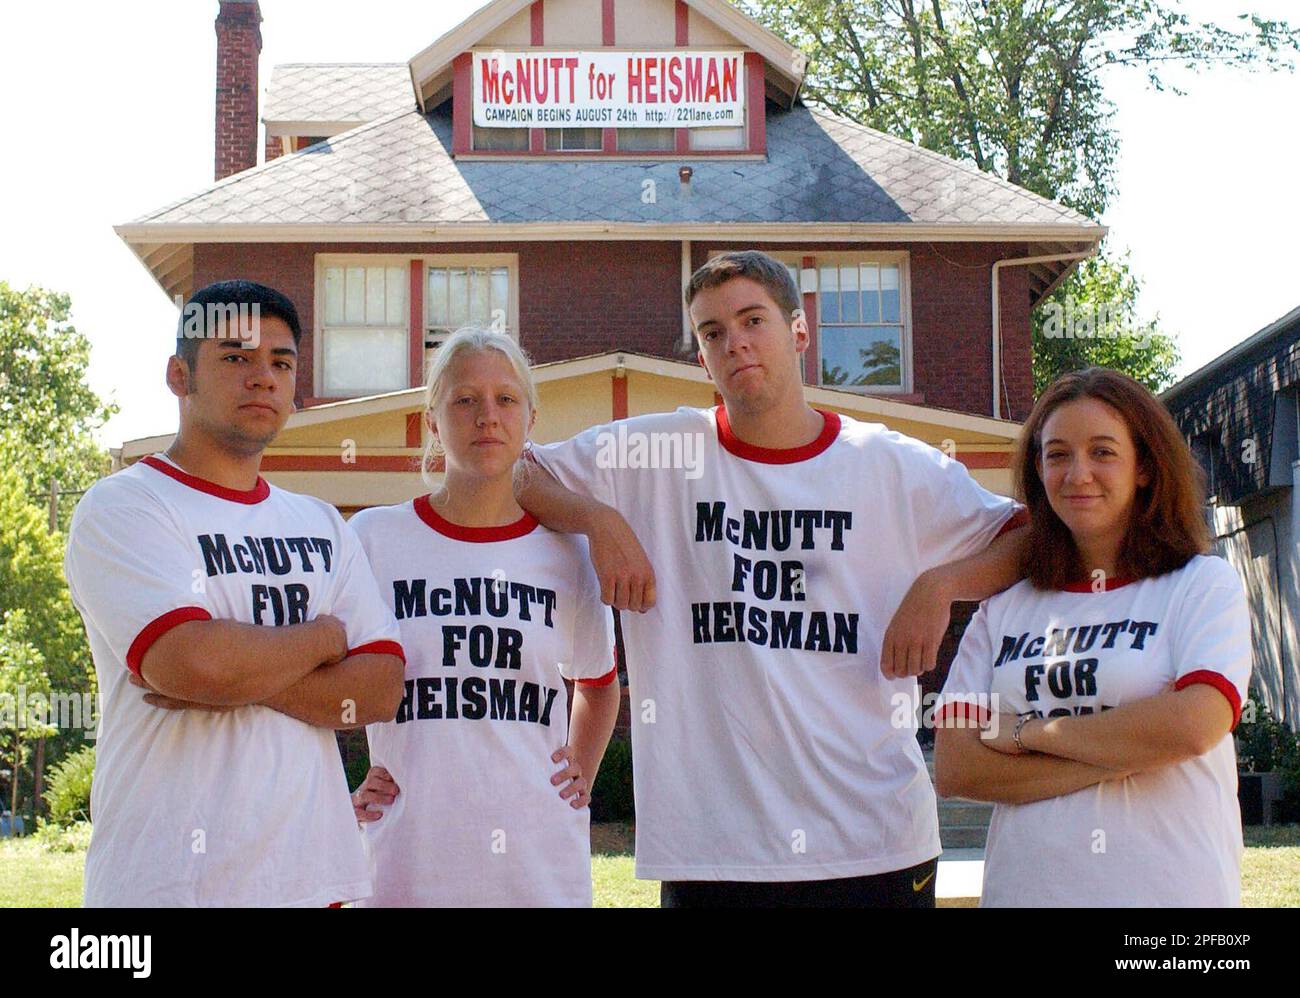 ohio-state-students-matt-dillon-left-ashley-roll-steve-jahn-and-brandy-fawcett-pose-in-front-of-their-house-off-campus-wearing-their-mcnutt-for-heisman-t-shirts-wednesday-sept-4-2002-in-columbus-ohio-the-students-made-the-shirts-as-a-gag-to-promote-ohio-state-defensive-back-richard-mcnutt-for-the-heisman-trophy-ap-phototerry-gilliam-2PFB0XP.jpg